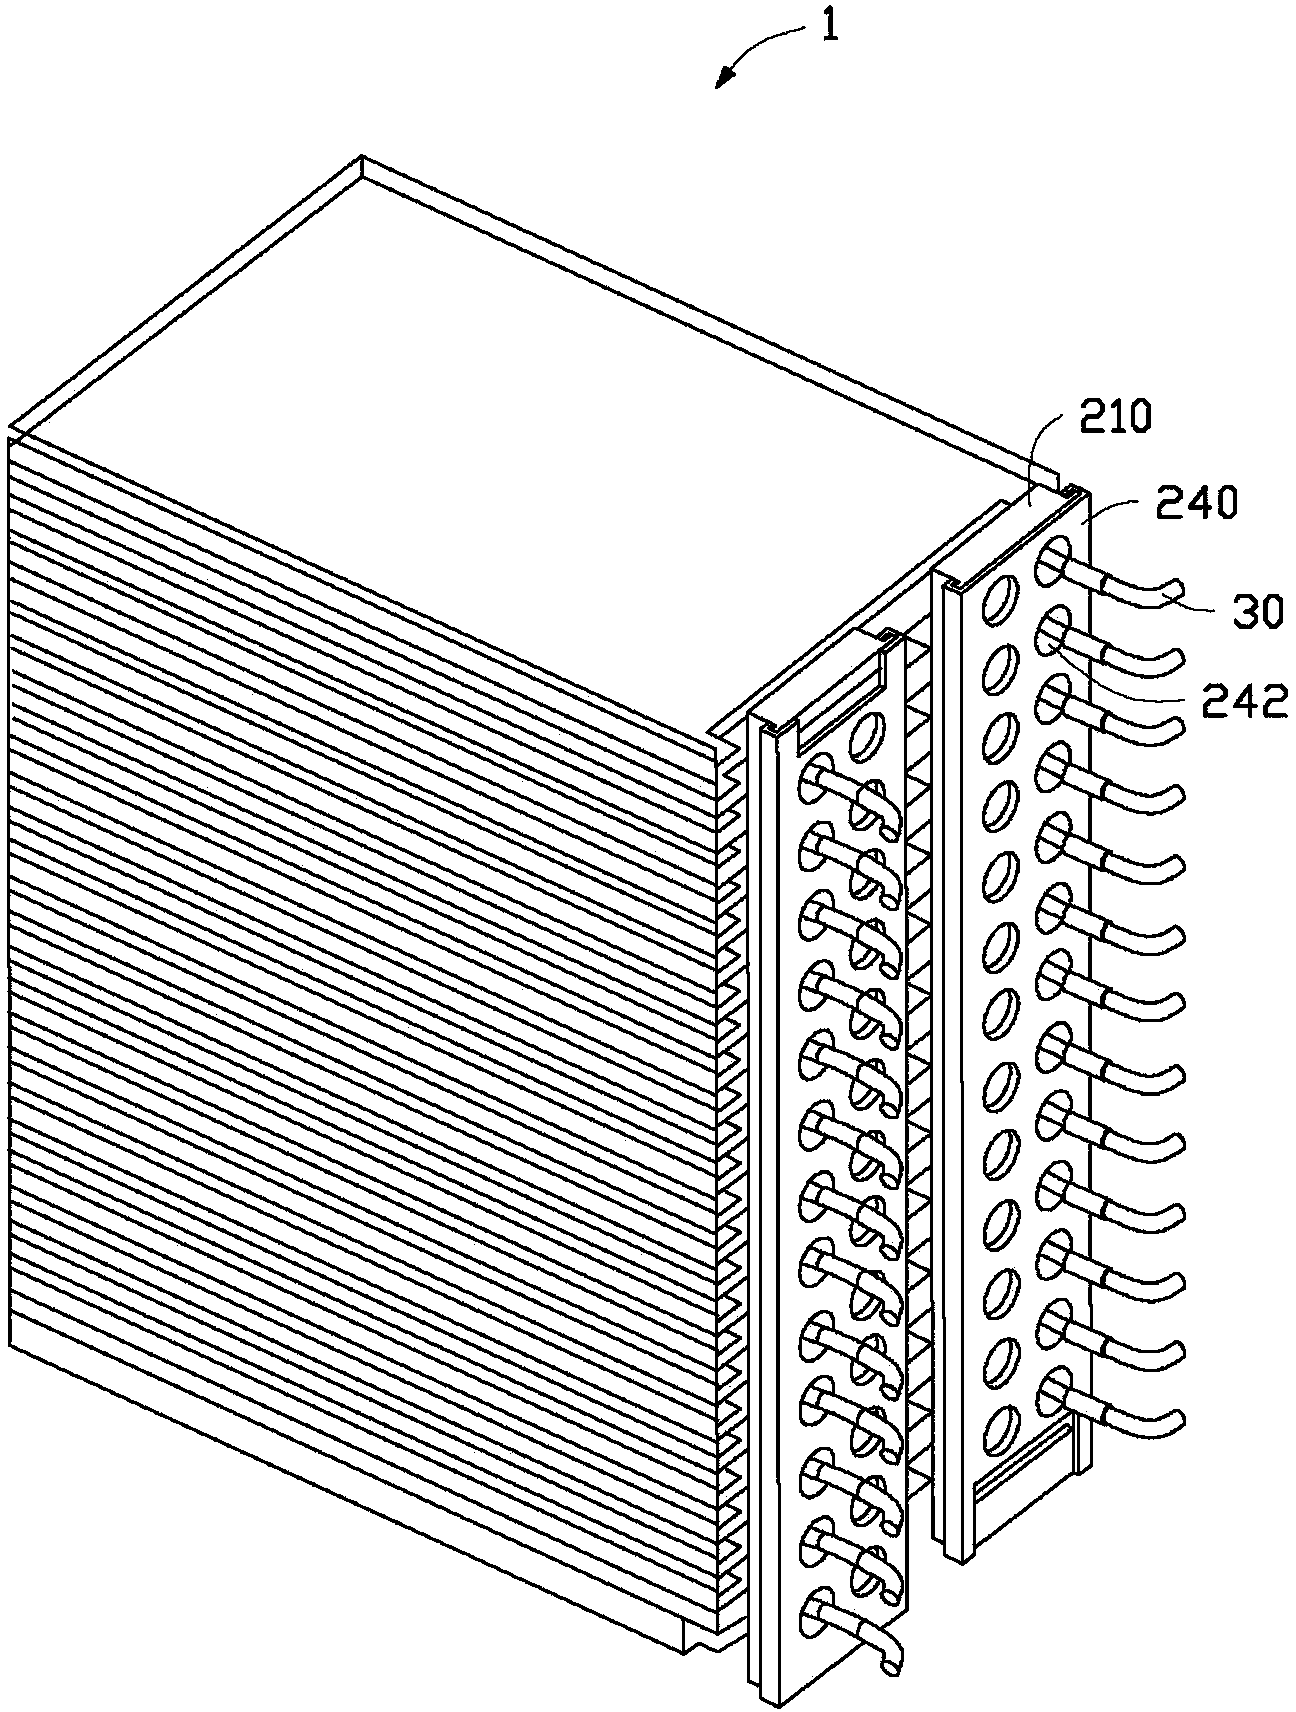 Battery pack with tab connection device